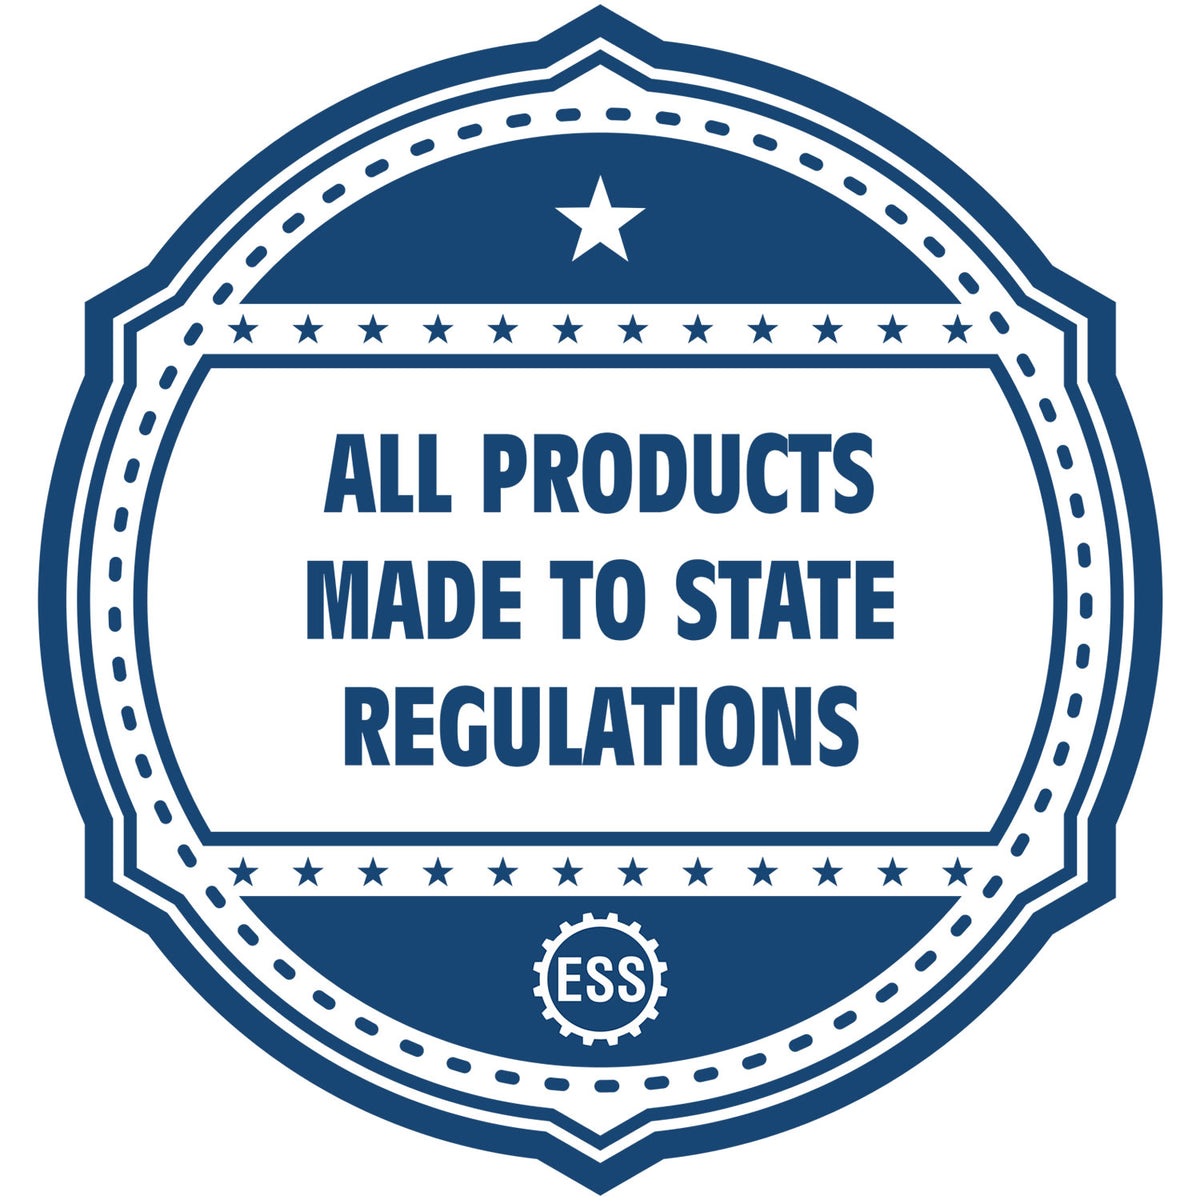 An icon or badge element for the Premium MaxLight Pre-Inked Massachusetts Landscape Architectural Stamp showing that this product is made in compliance with state regulations.